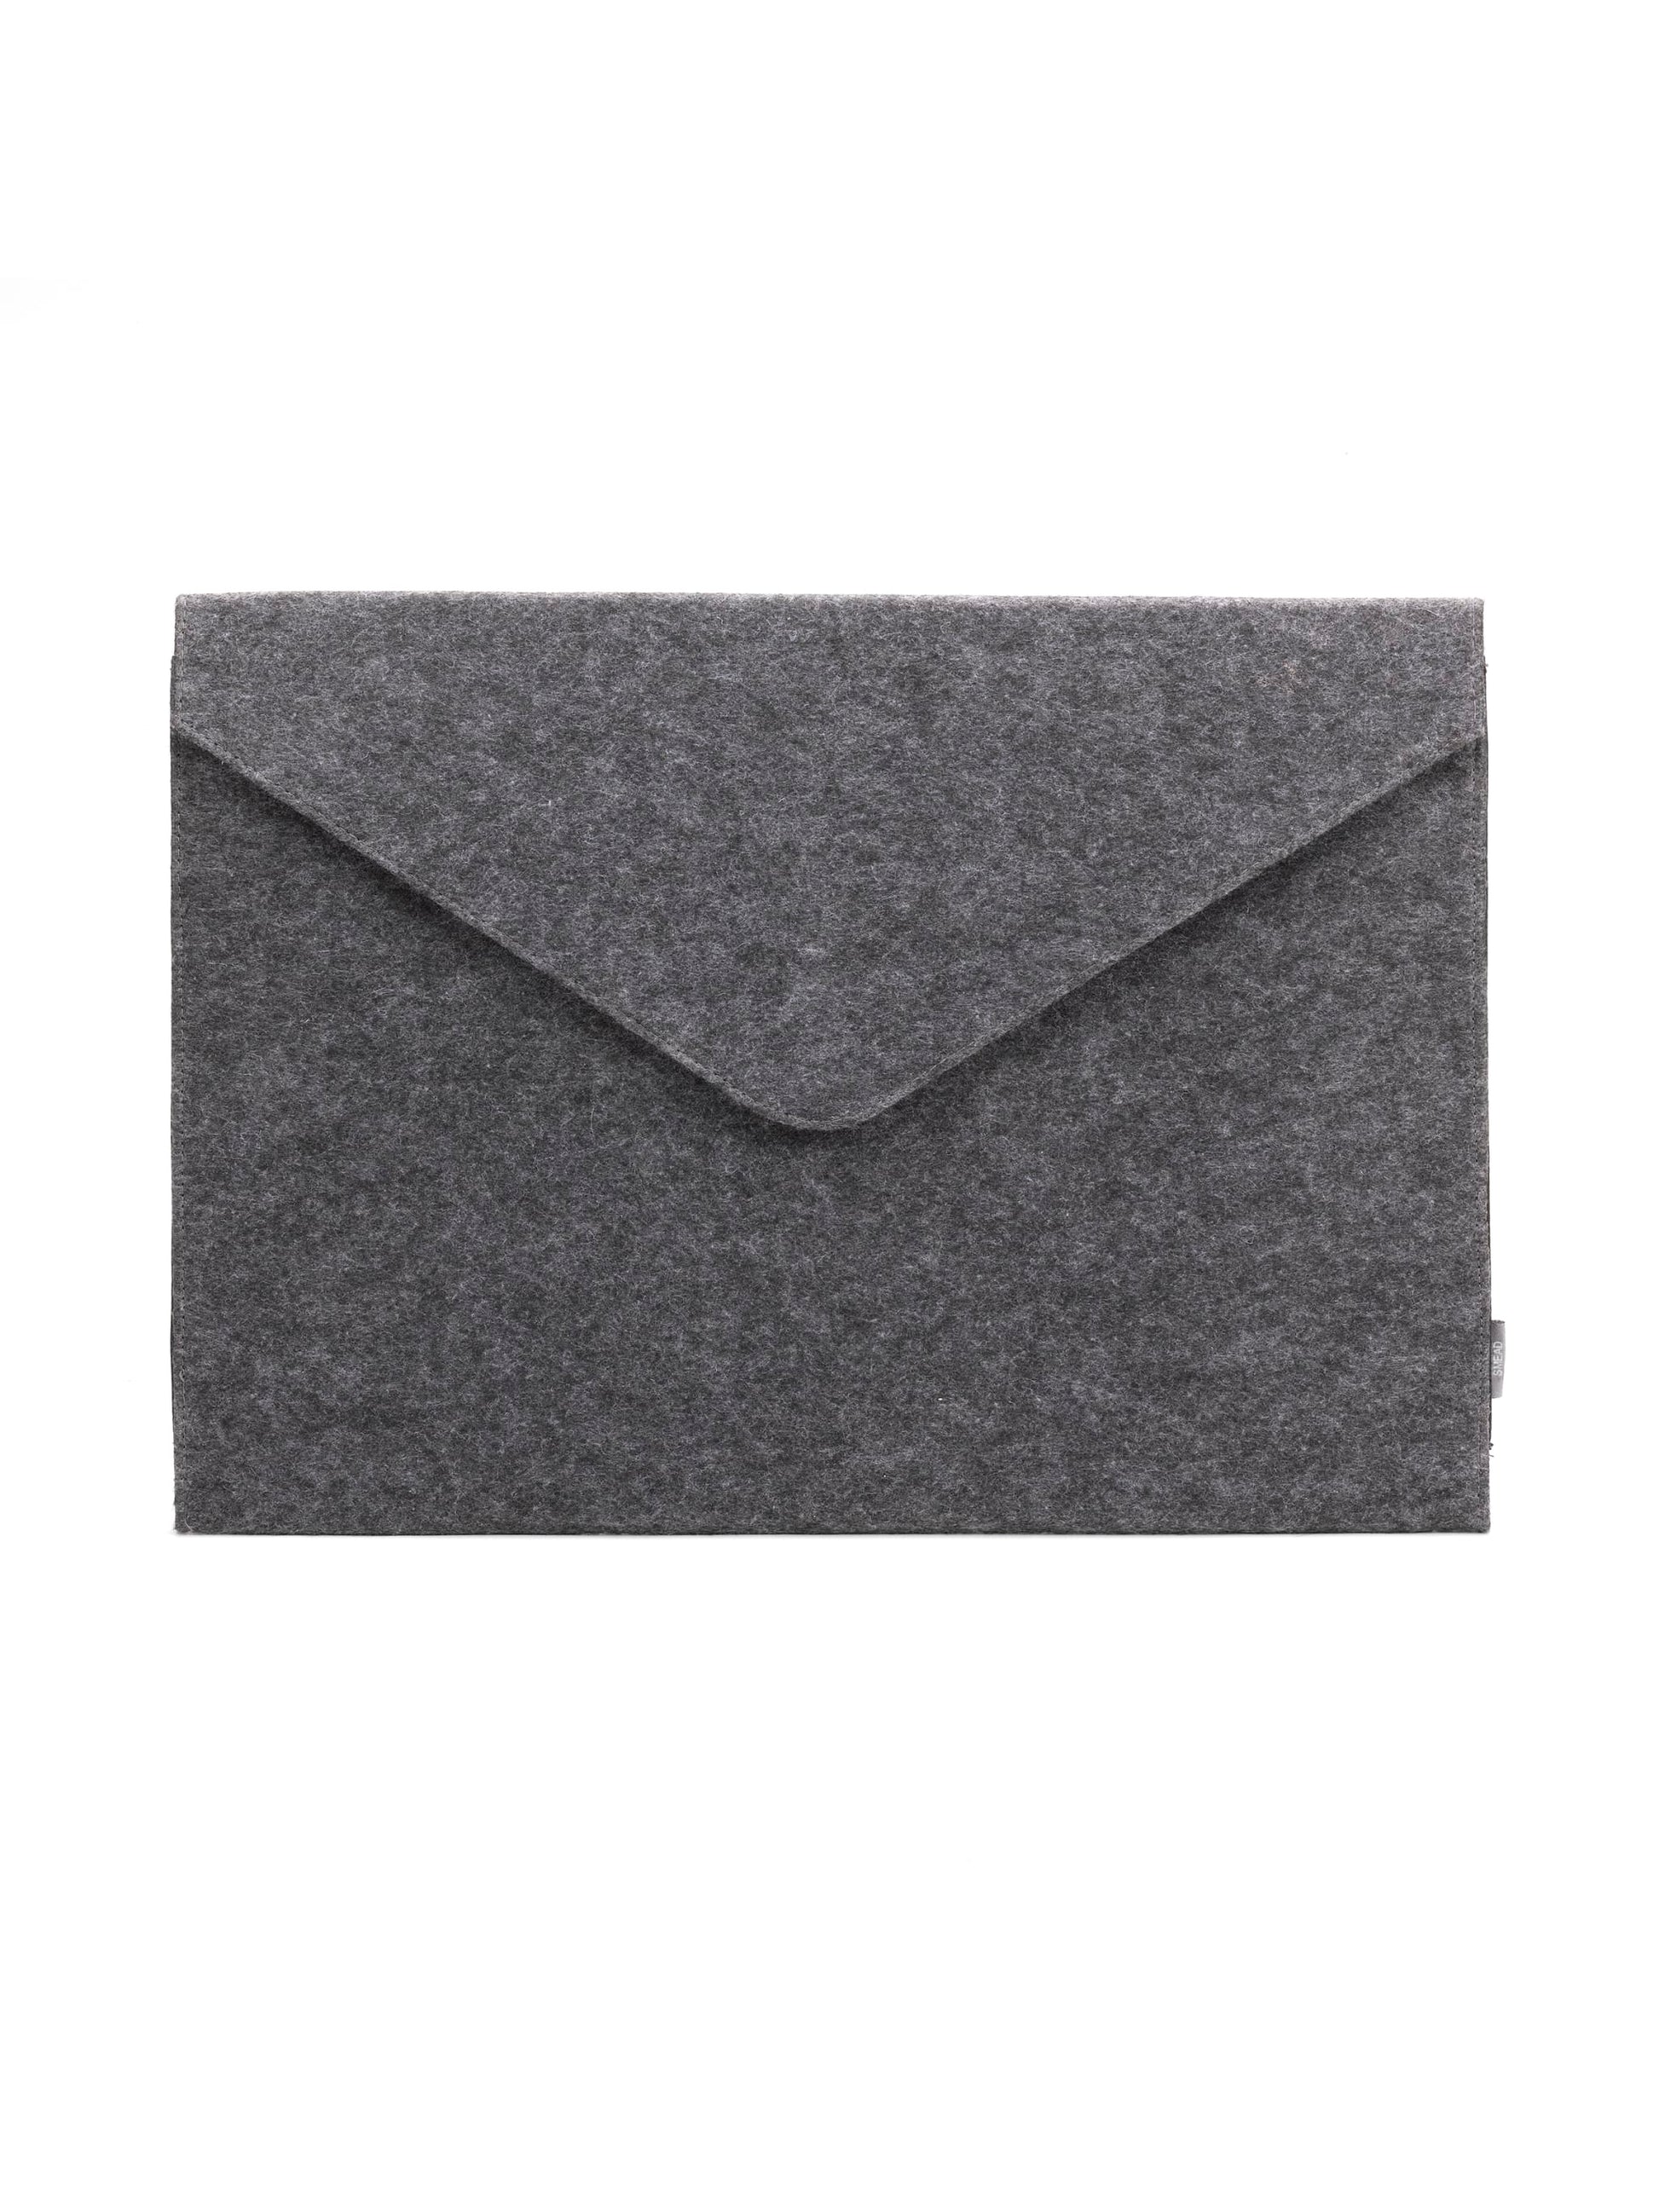 Soft Touch Cloth Expanding Files, 2-Inch Expansion, Gray Color, 11X17 Size, Set of 1, 086486709248